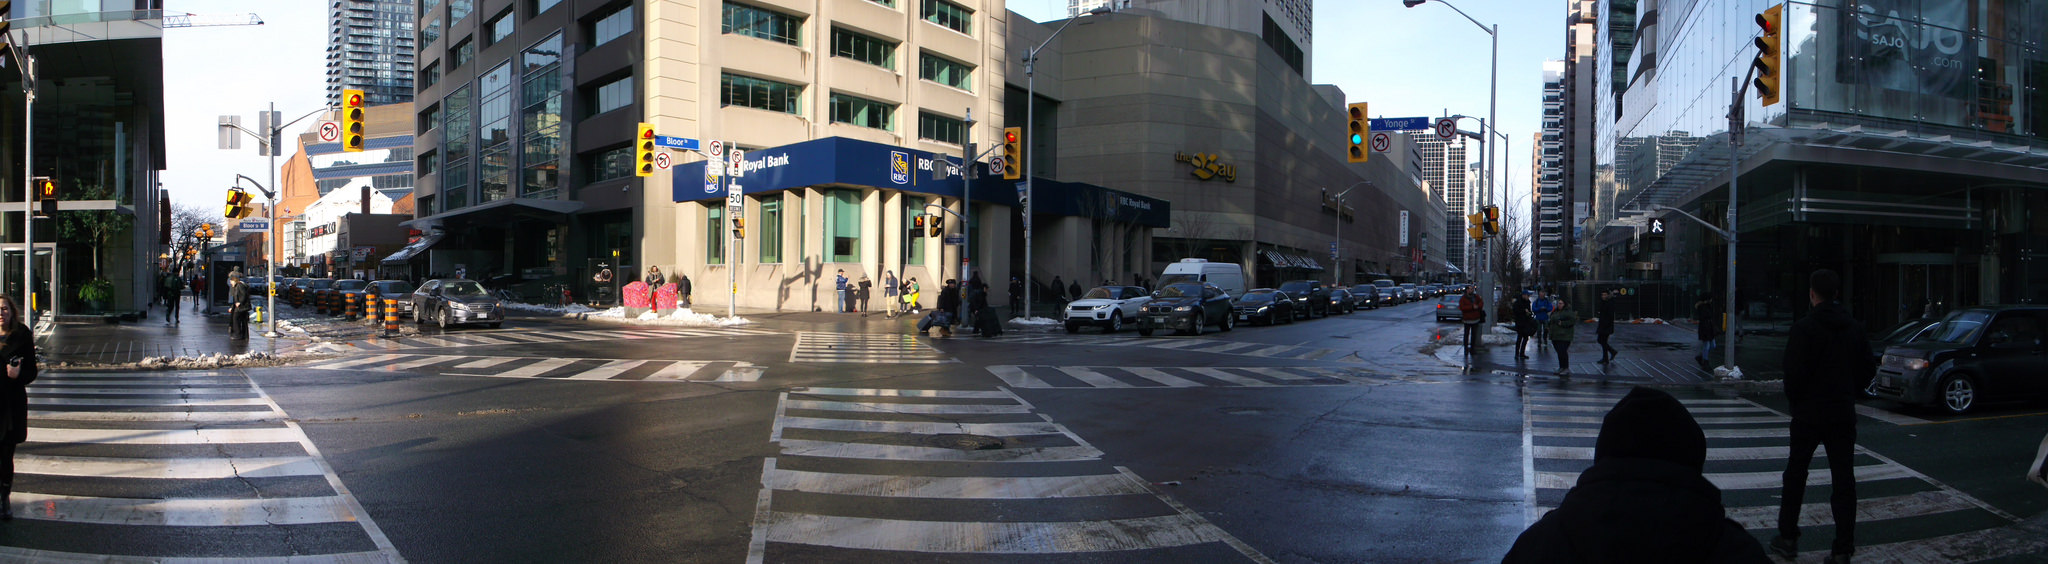 Street view of The Bay on Bloor and Yonge.